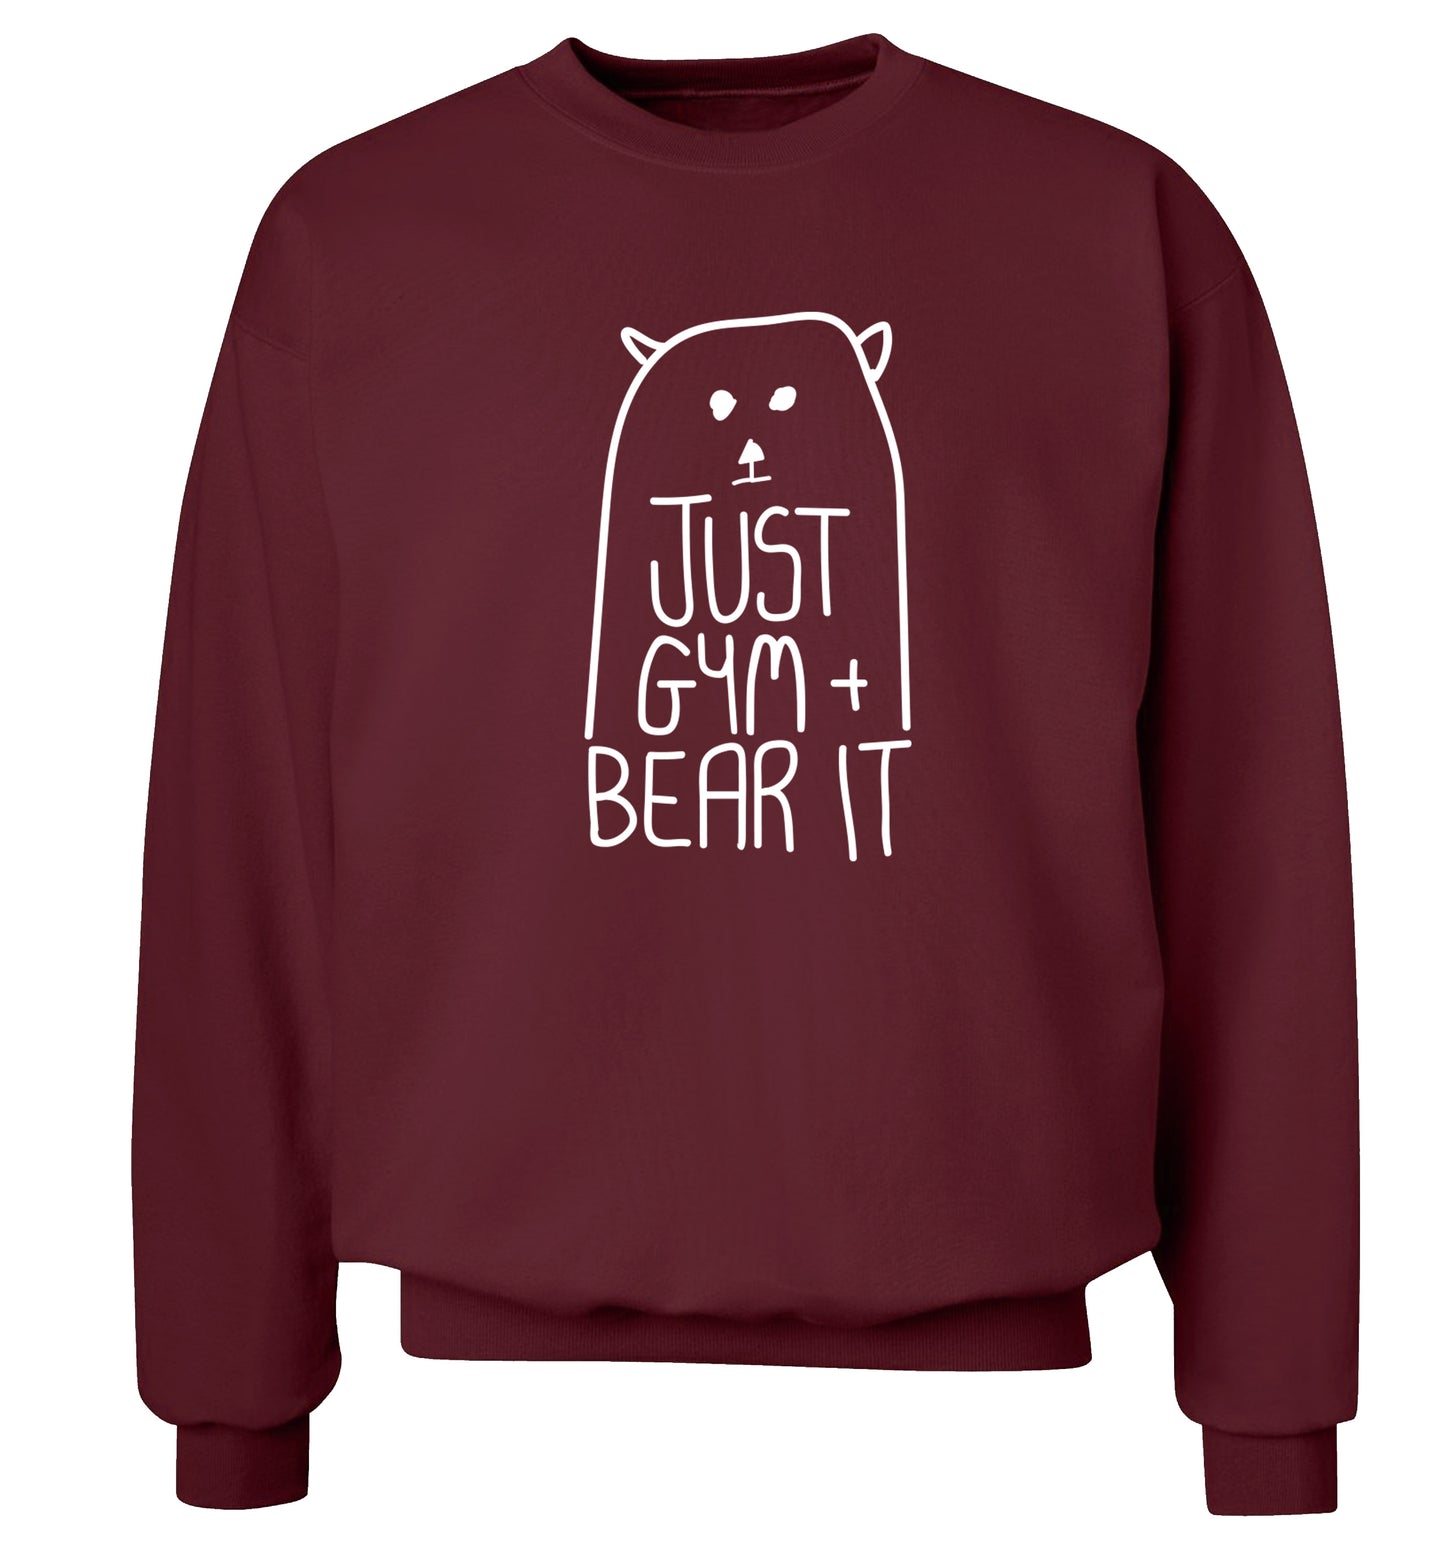 Just gym and bear it Adult's unisex maroon Sweater 2XL